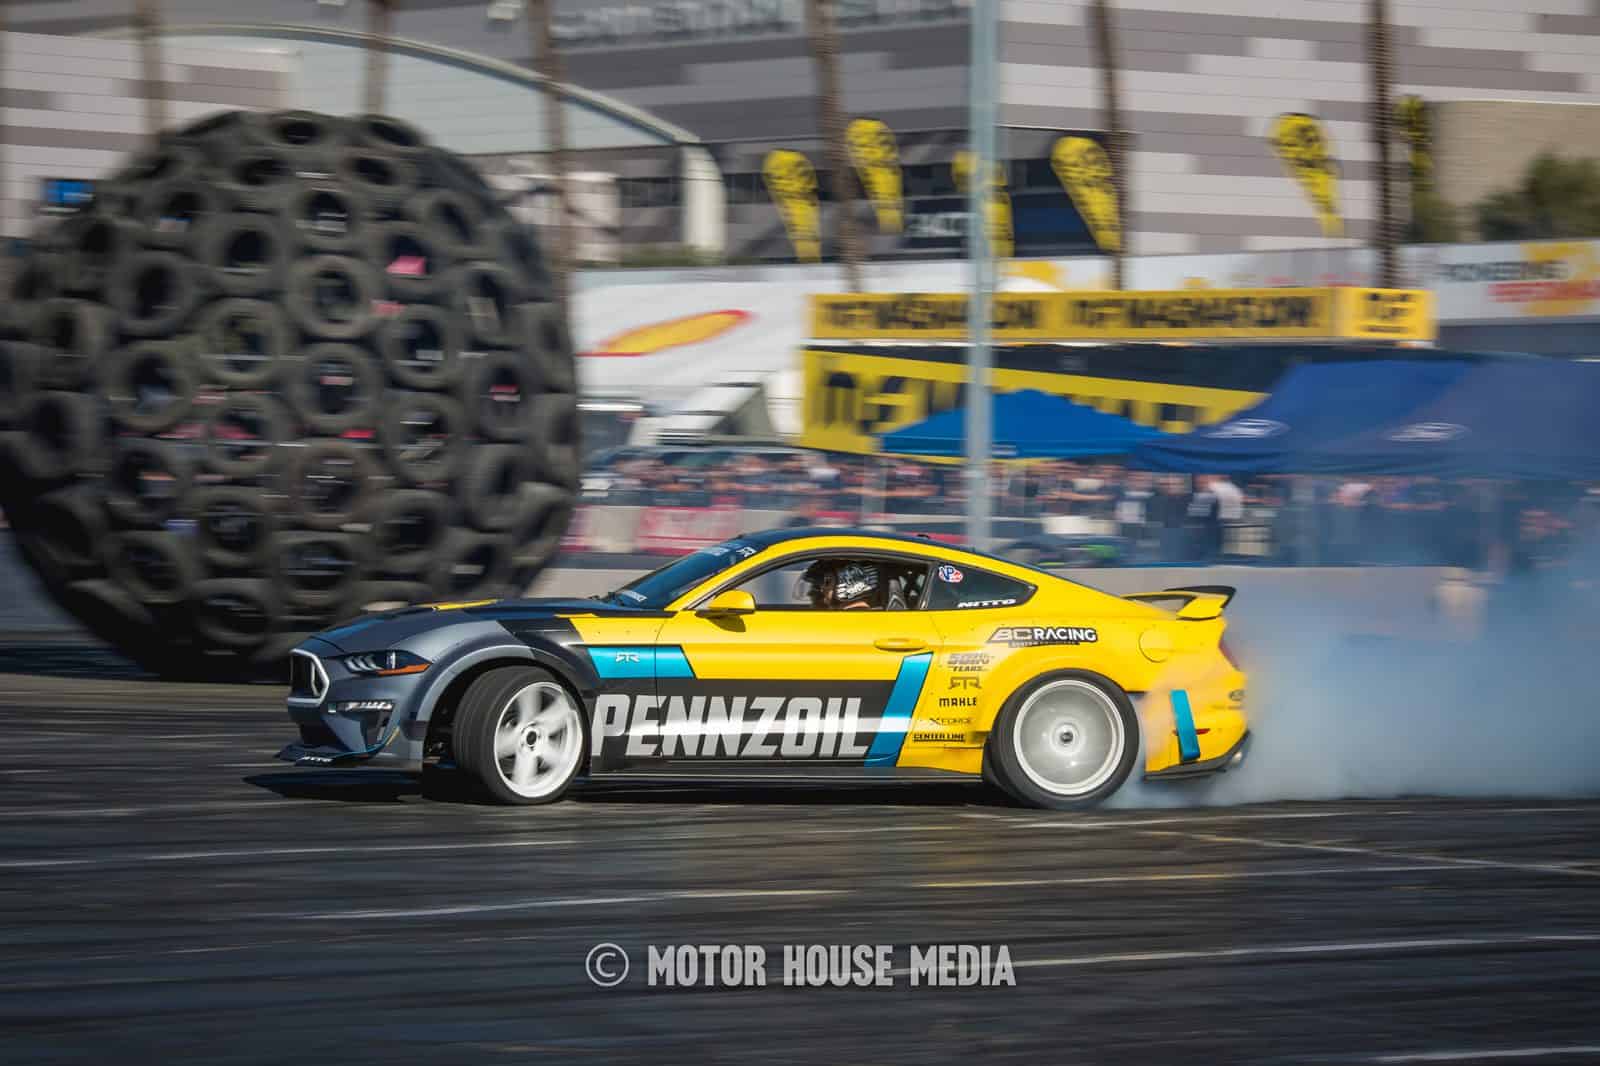 Penzoil Drifters at the Ford out front display at the Sema show